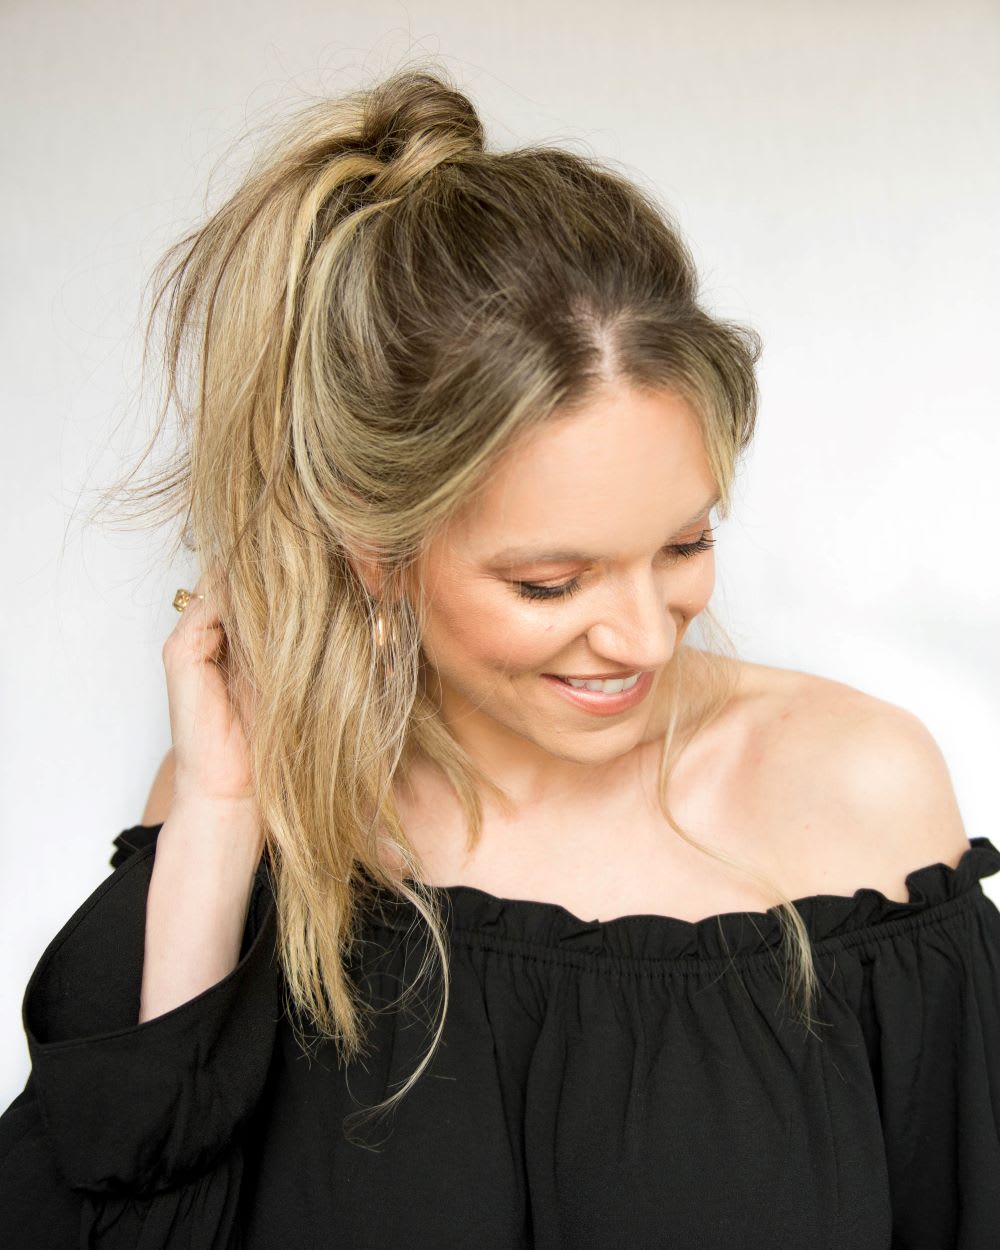 How To Fake Bangs With A High Ponytail - Lulus.com Fashion Blog